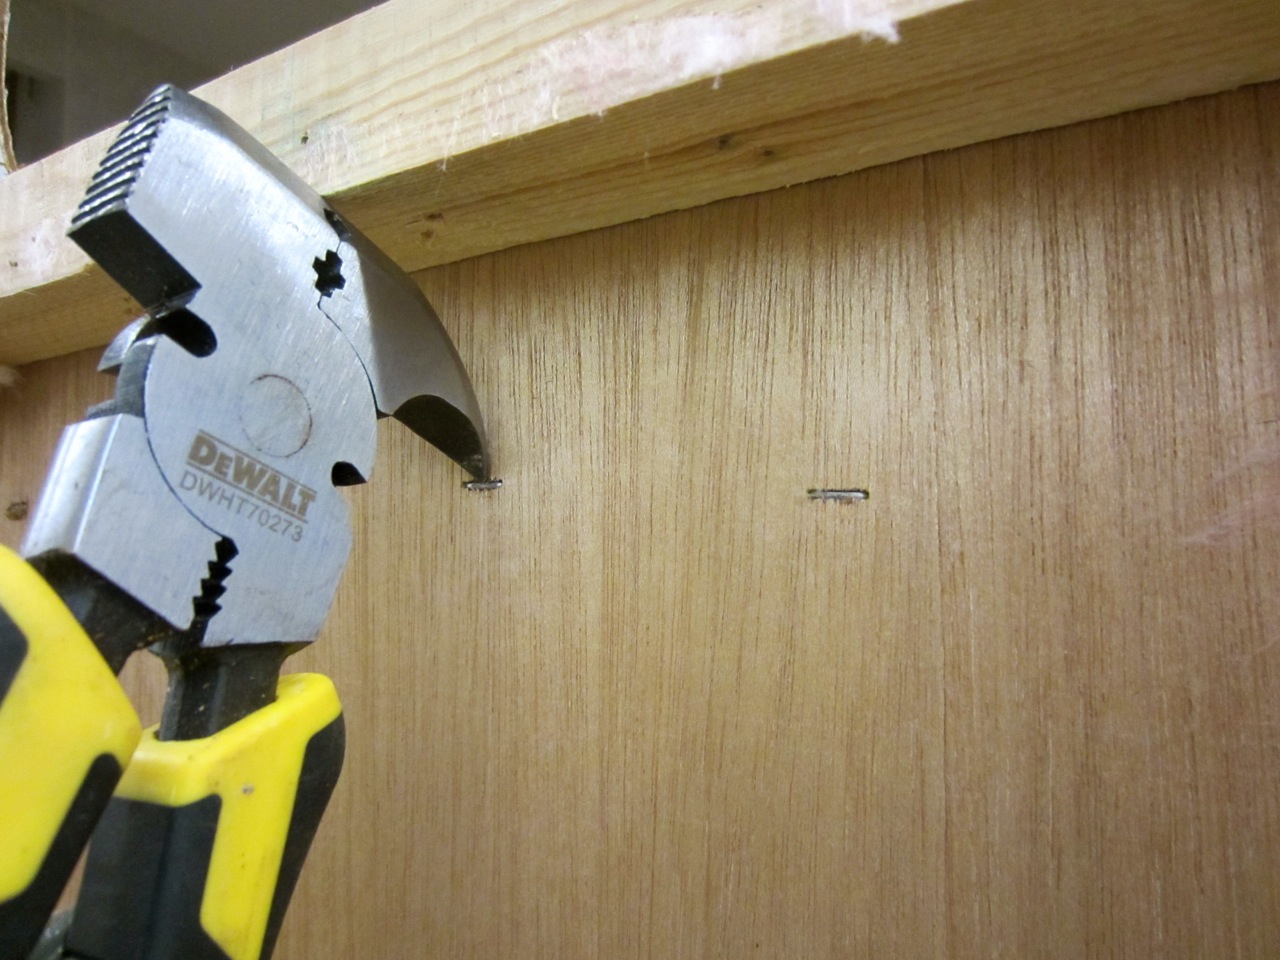  We had to remove all the staples that keep the cabinets attached to the walls.&nbsp;Go get yourself a pair of fencing pliers! 